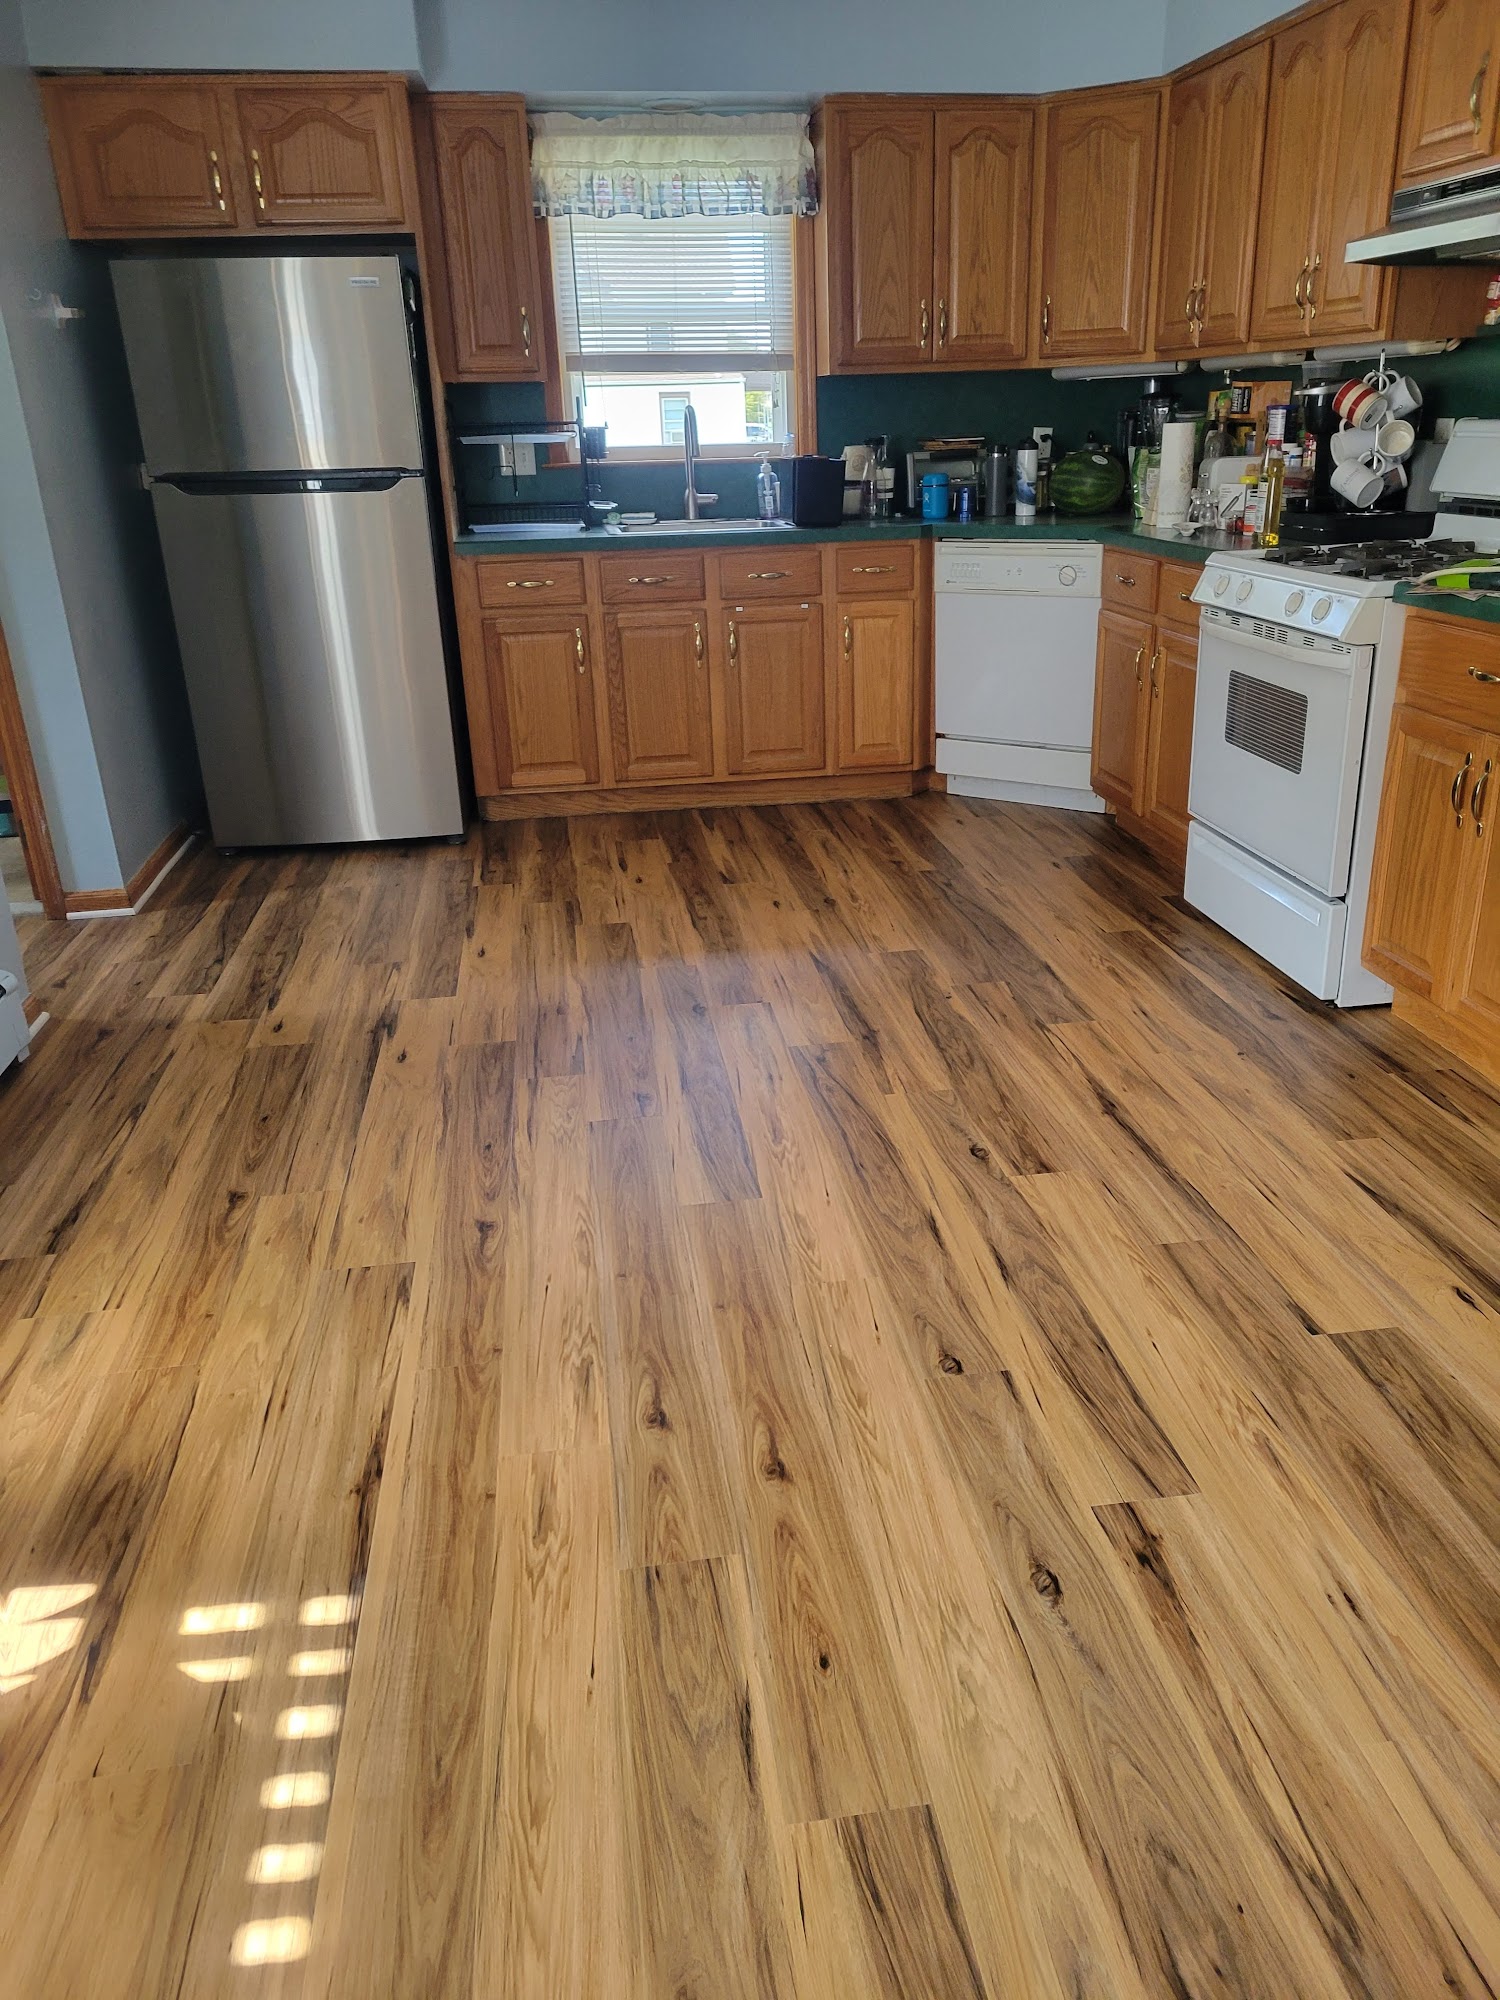 Middlesex County Flooring |J Brothers Flooring 549 Lincoln Blvd, Middlesex New Jersey 08846